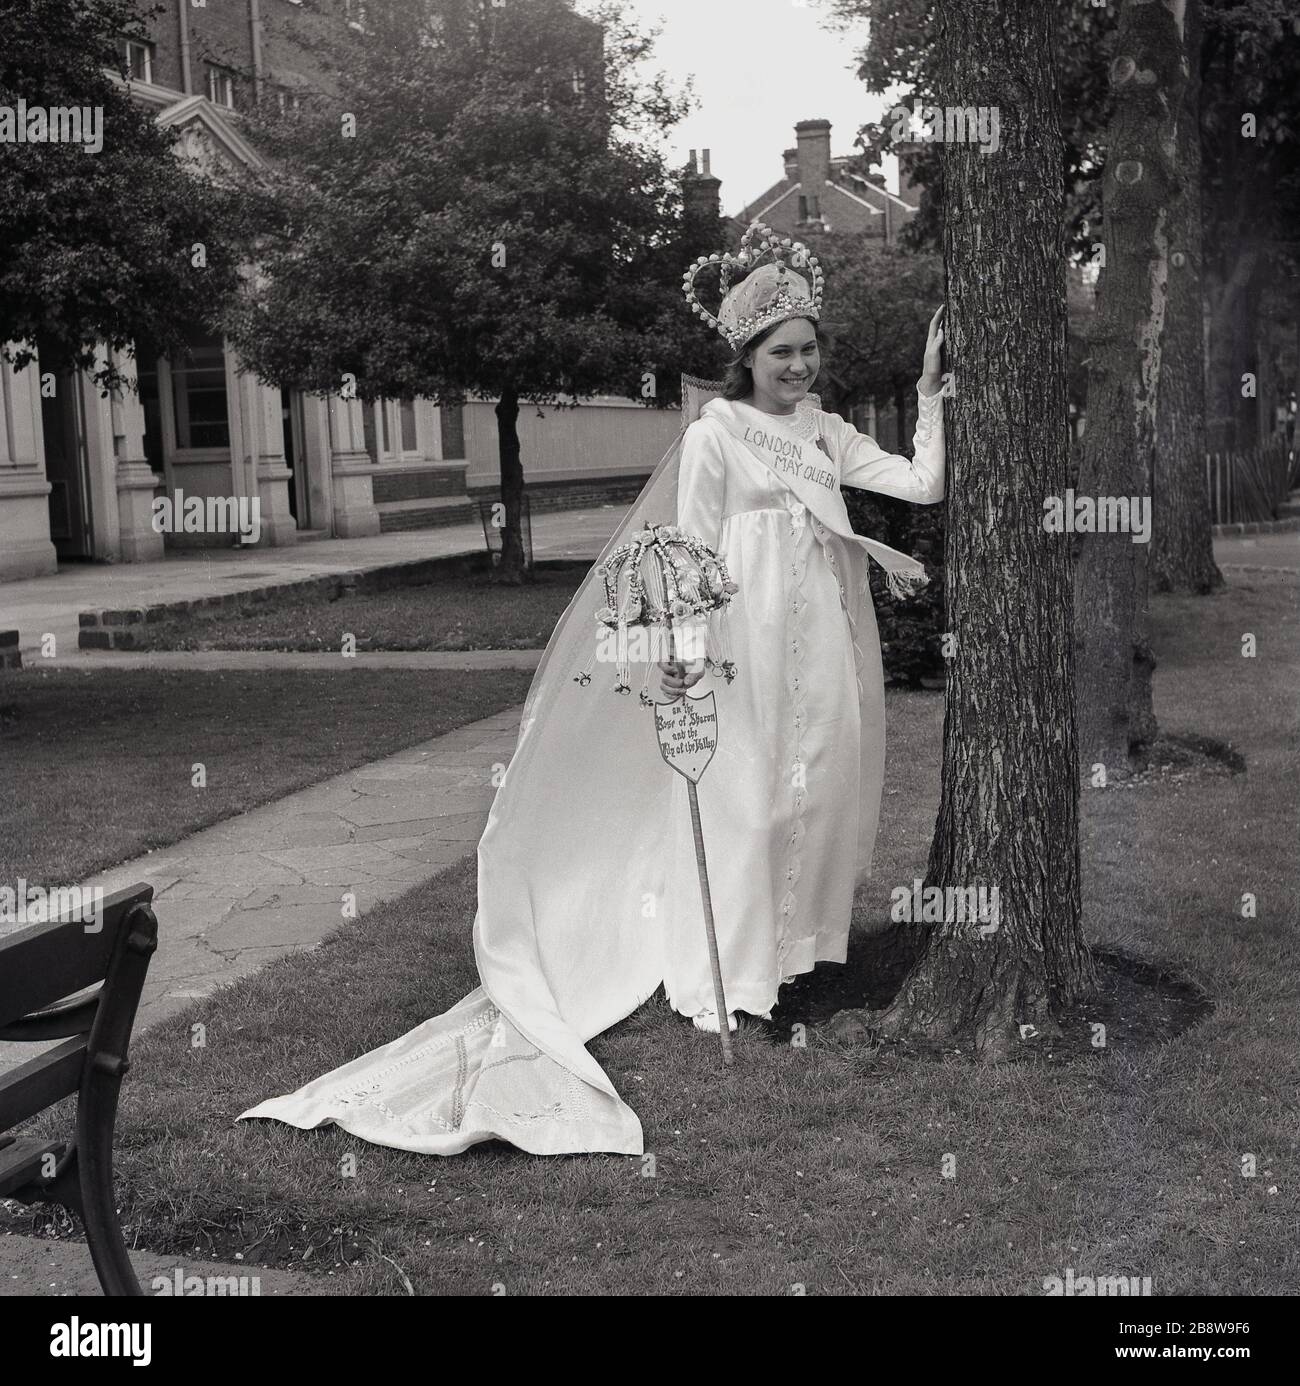 1960s, historical, standing outside, the excited and newly crowned London May Queen, a young teenage girl wearing her gown and tiara, Lewisham, South East London, England, UK. Stock Photo